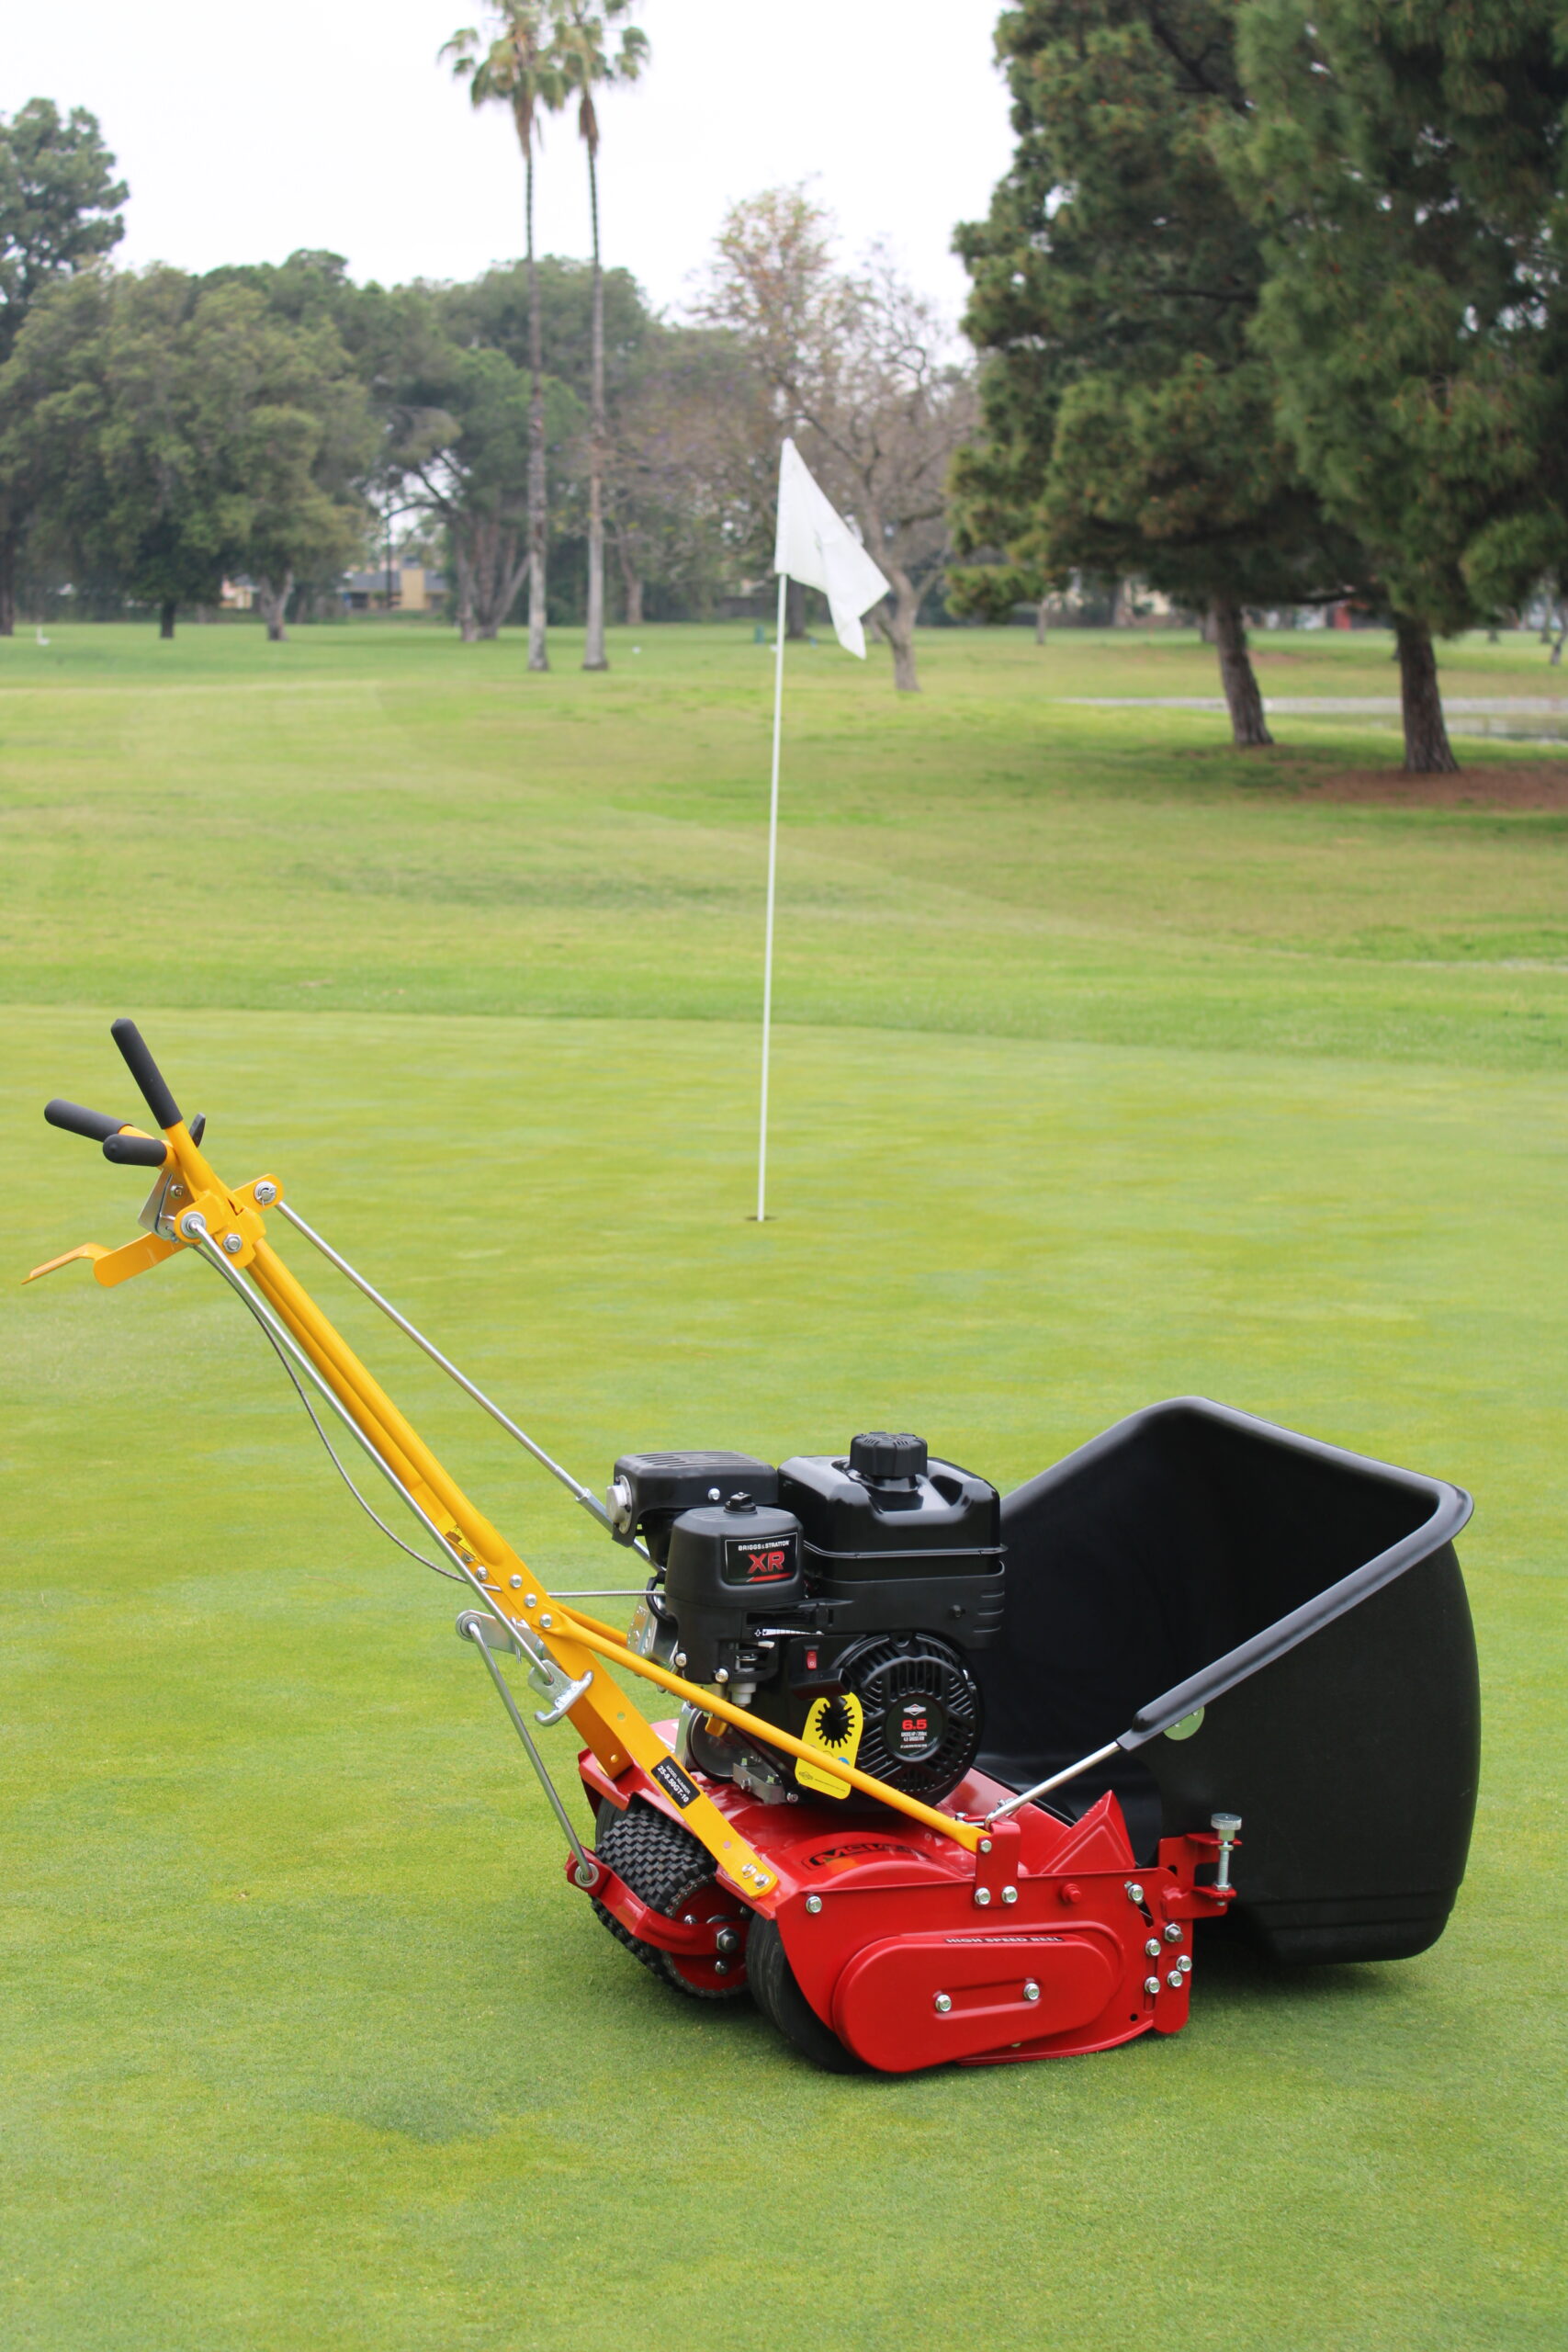 25 McLane10-Blade GreensKeeper designed for Putting Greens (cuts